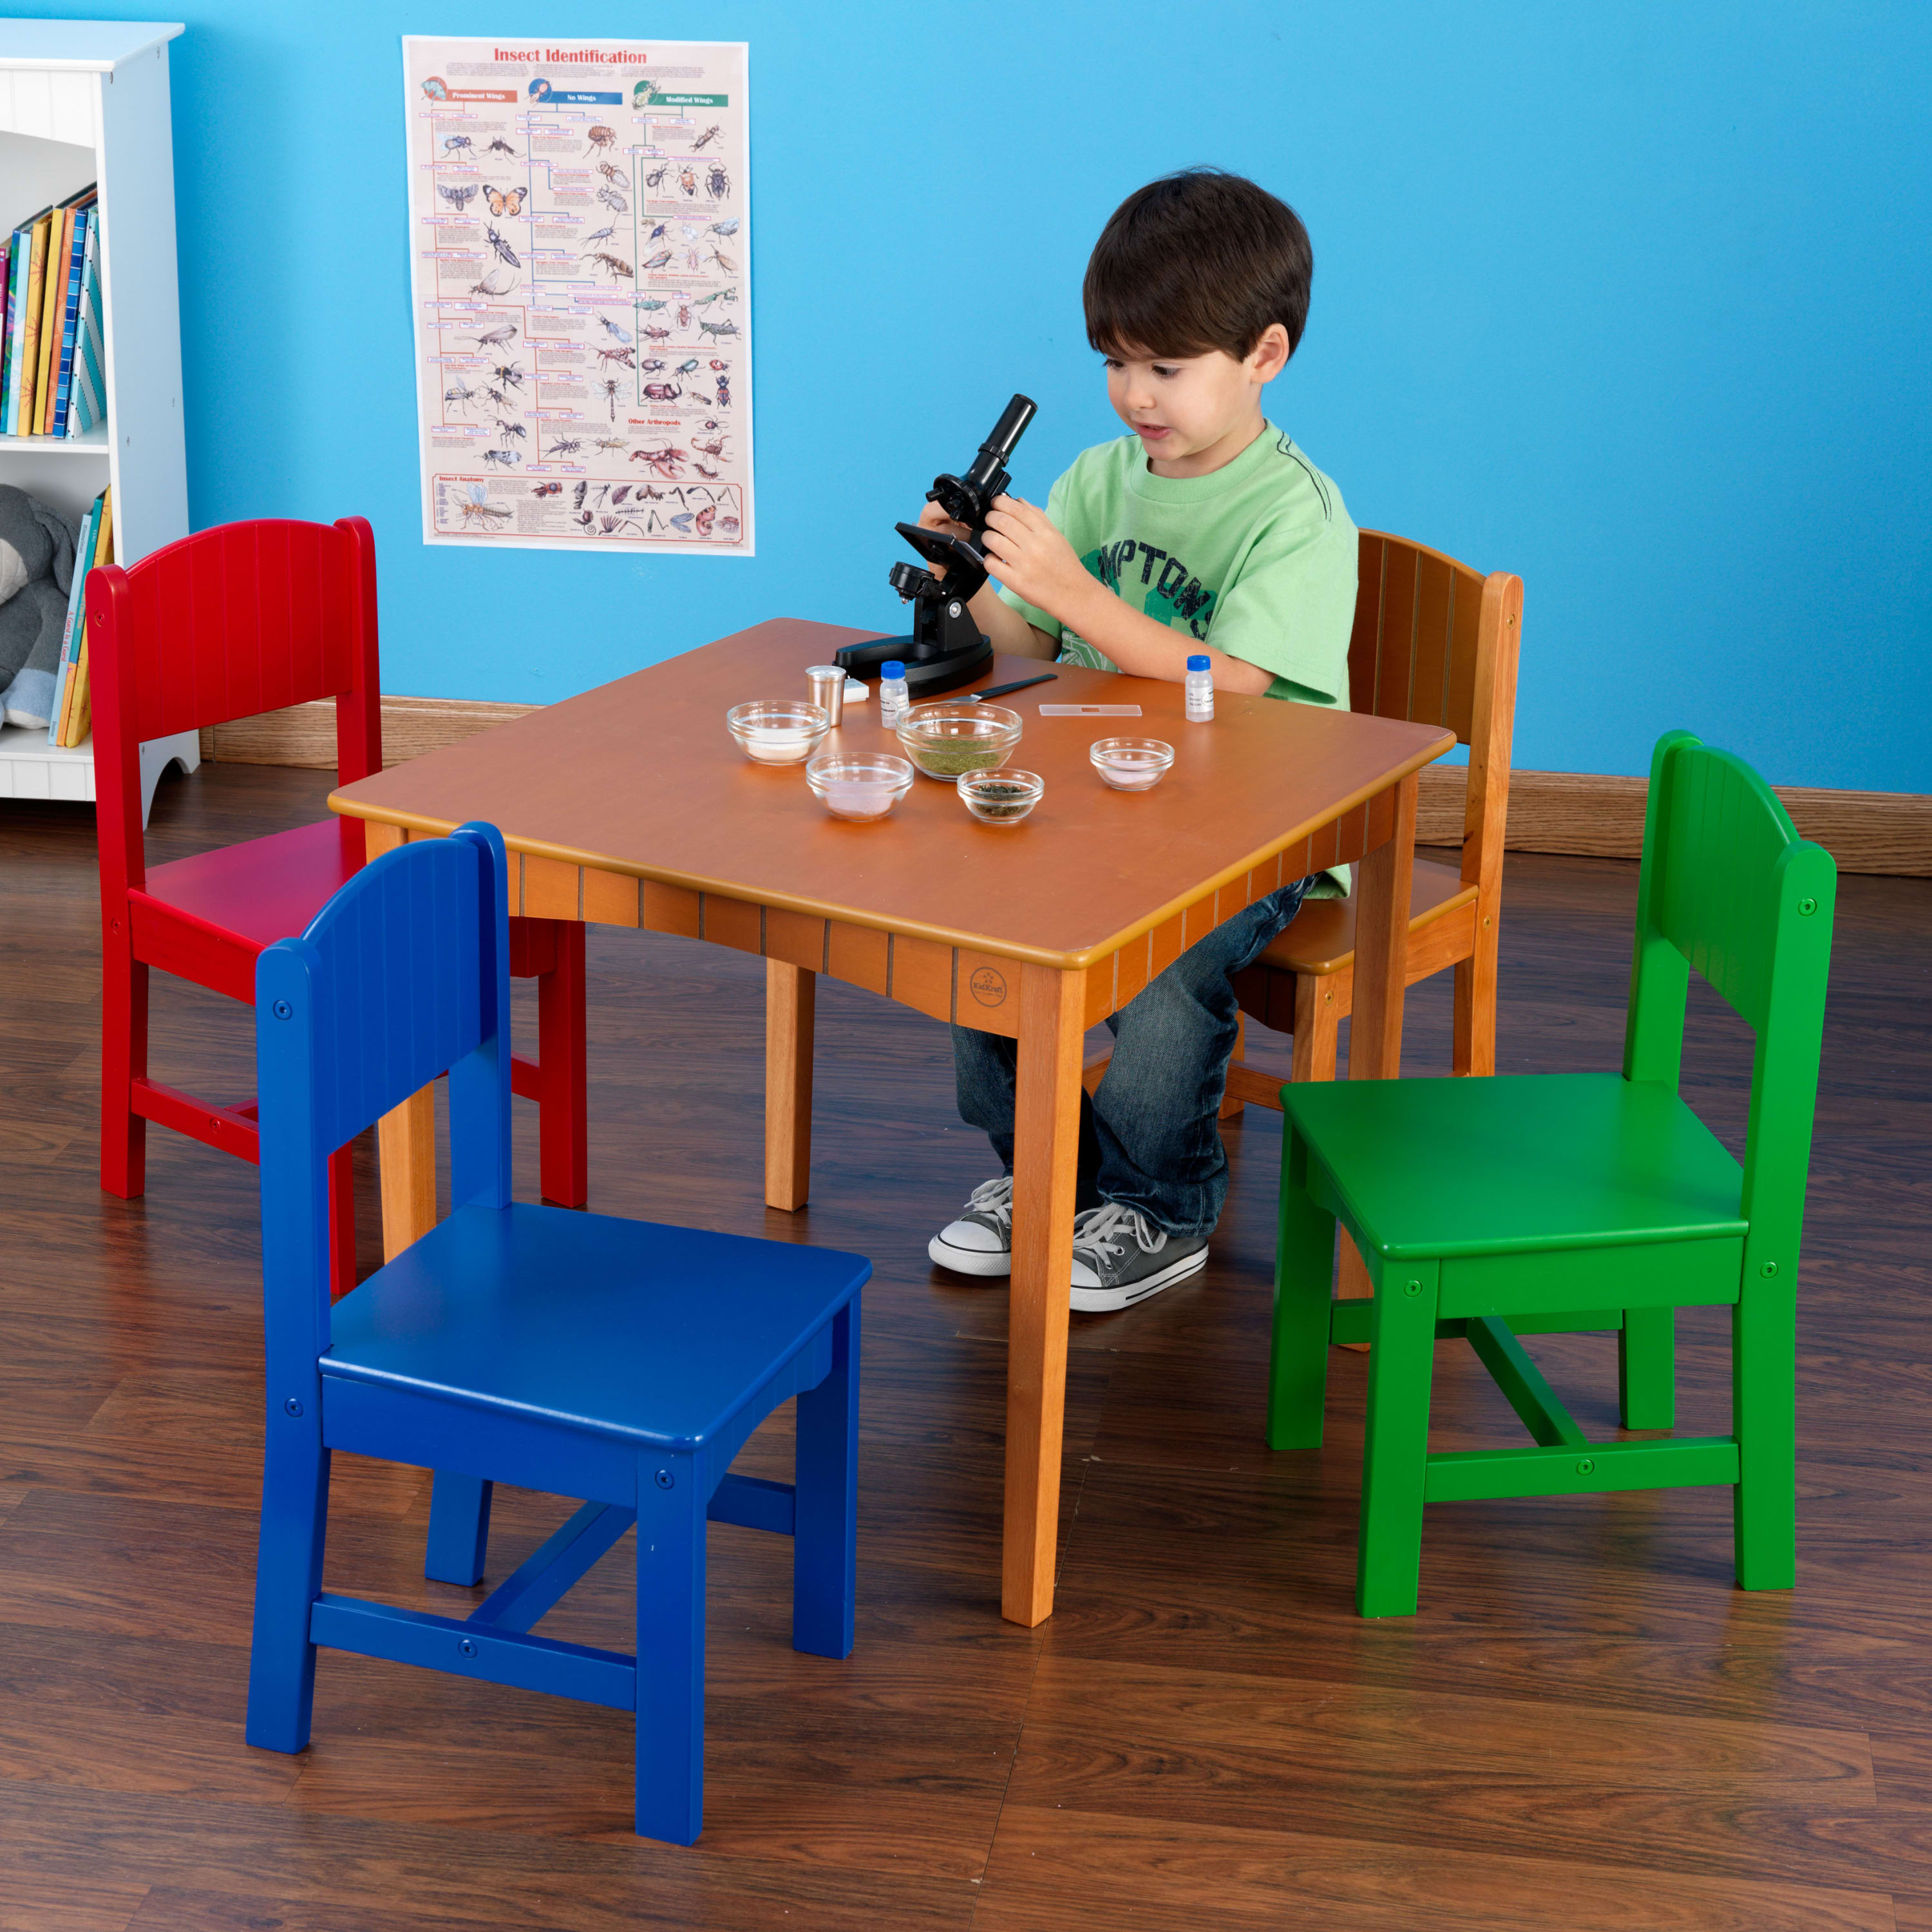 KidKraft Nantucket Wooden Table & 4 Chair Set, Primary Colors - image 3 of 7